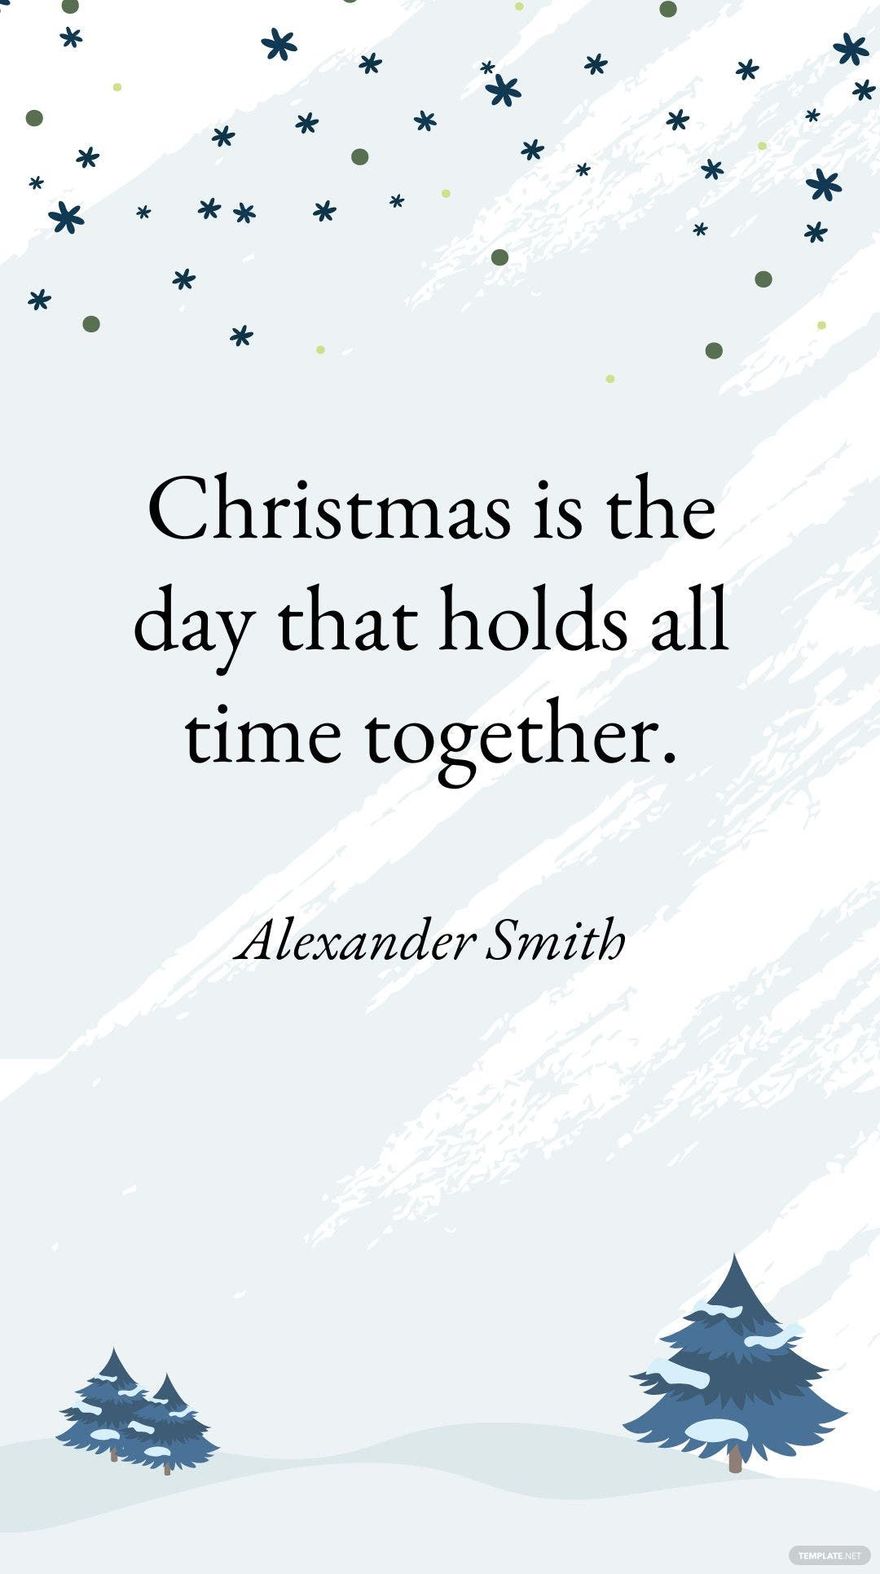 Free Alexander Smith - Christmas is the day that holds all time together. in JPG